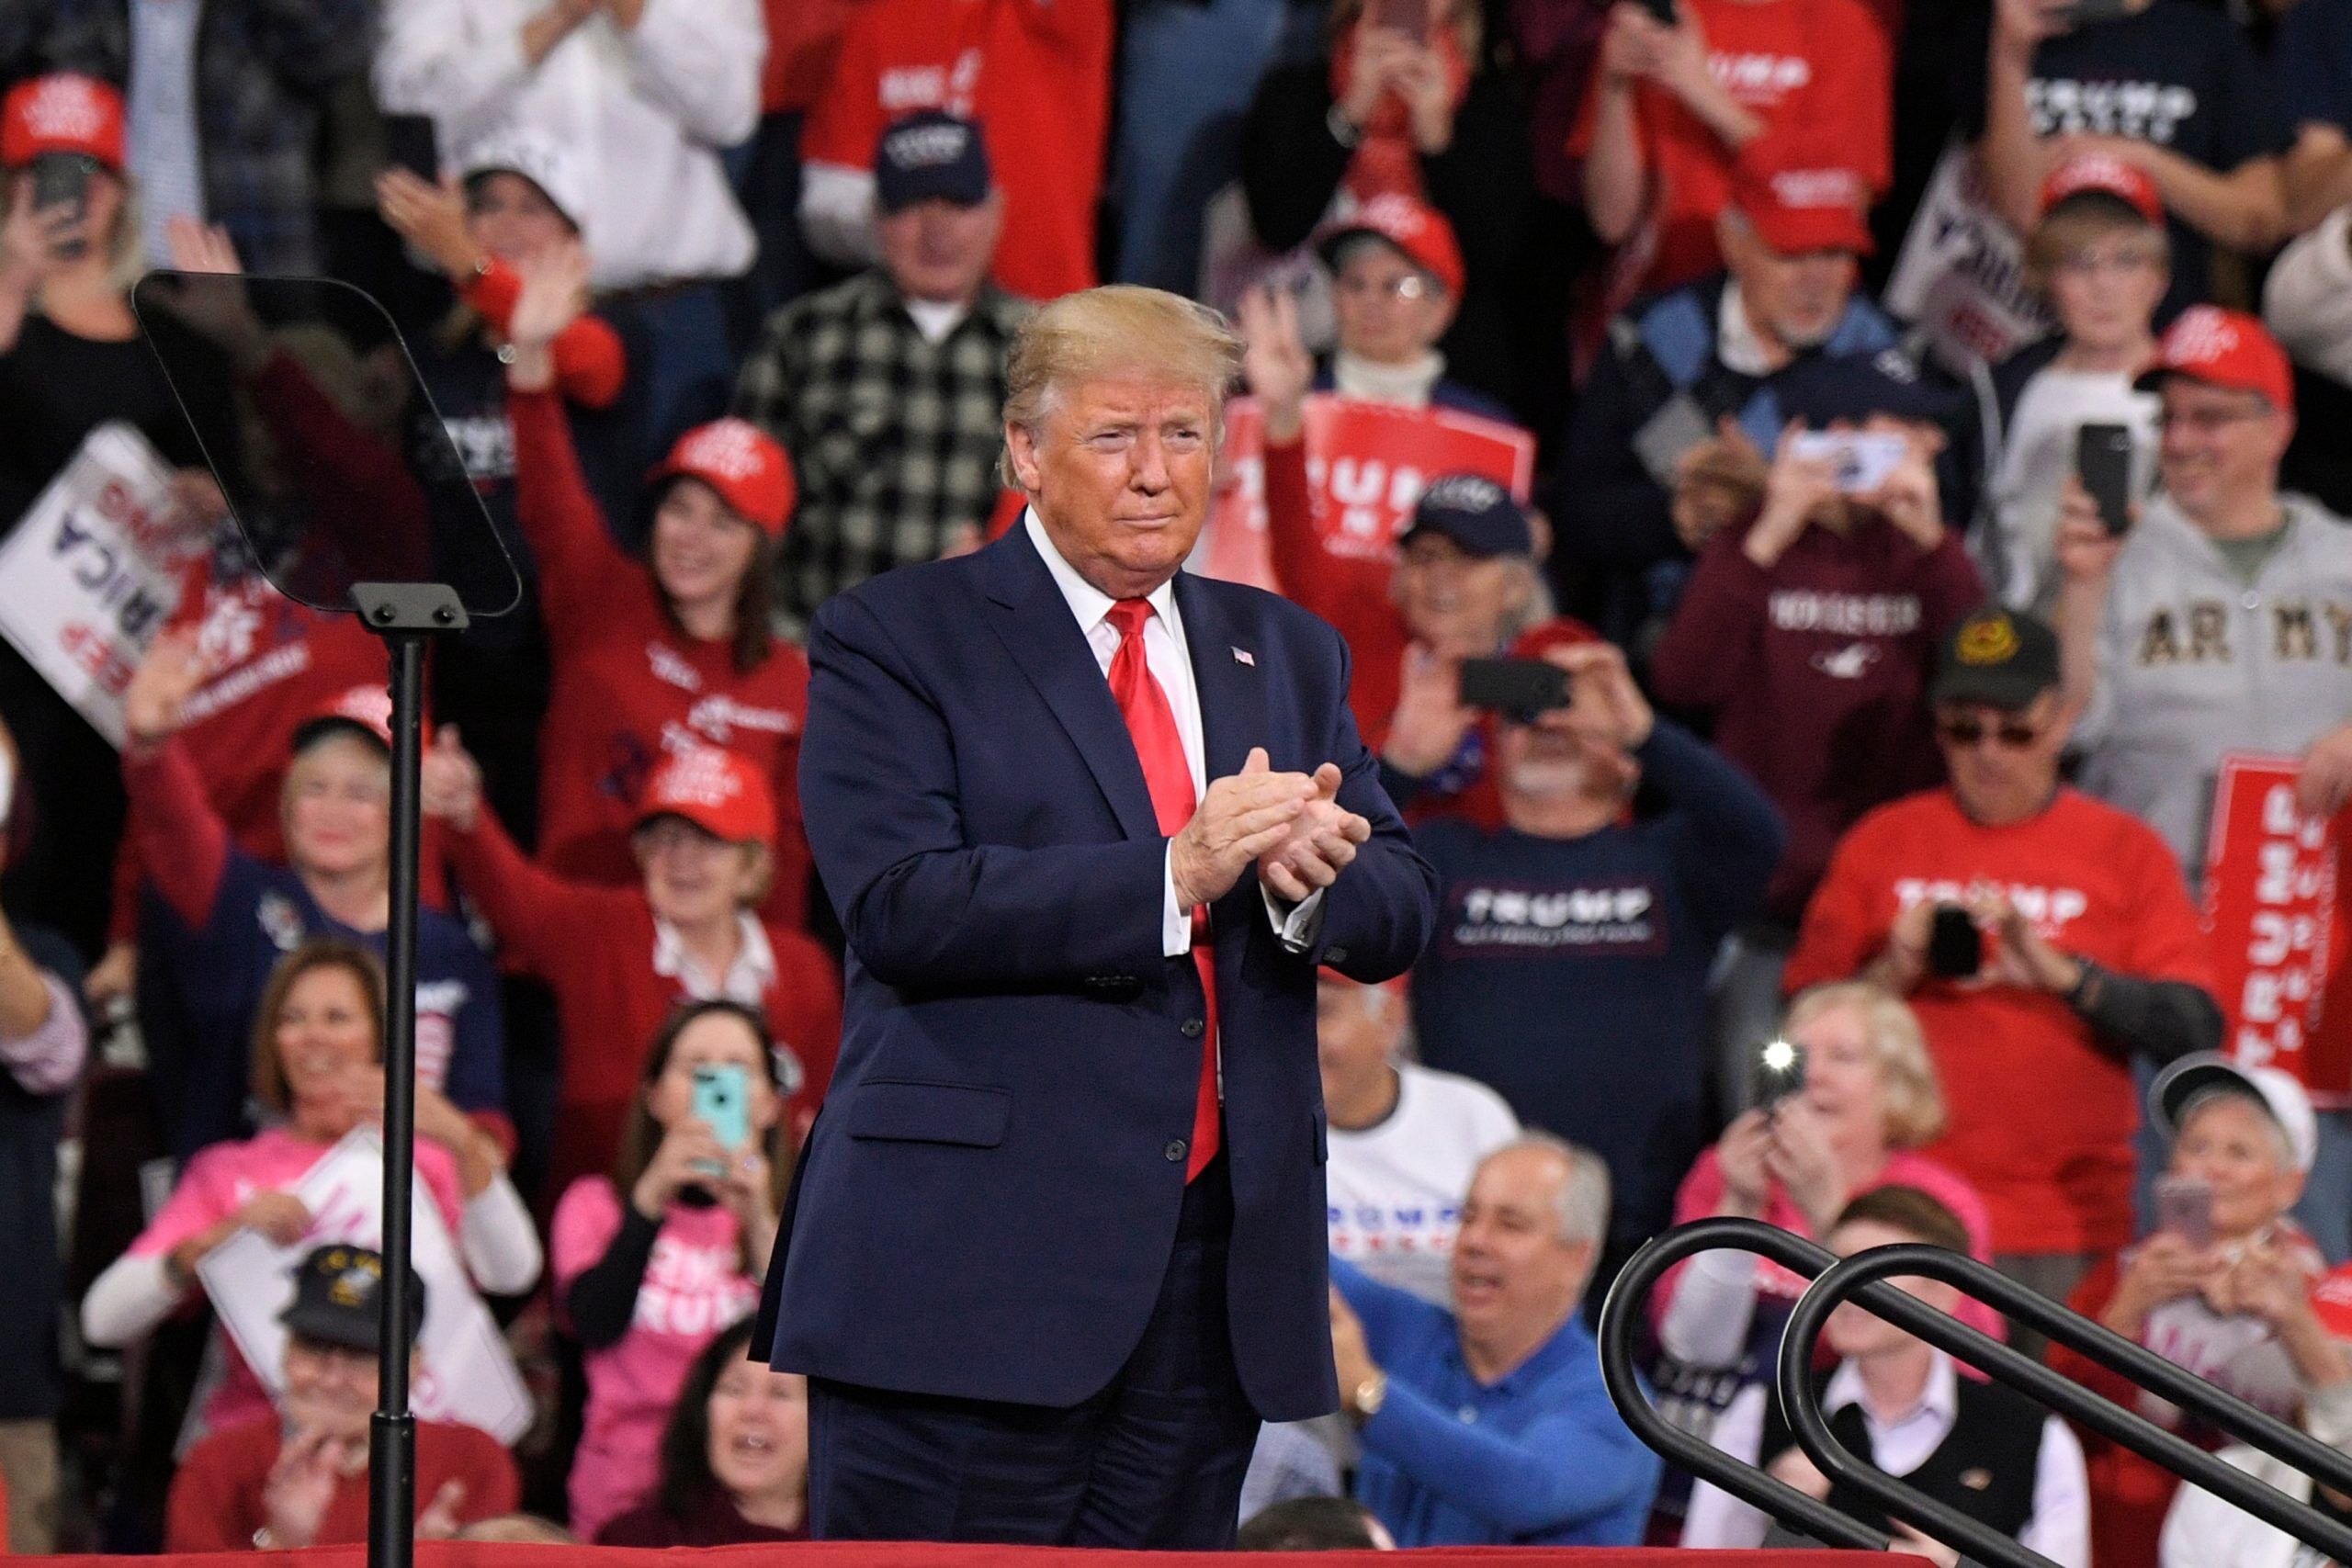 U.S. President Donald Trump attends a campaign rally on December 10, 2019 at Giant Center in Hershey, Pennsylvania.